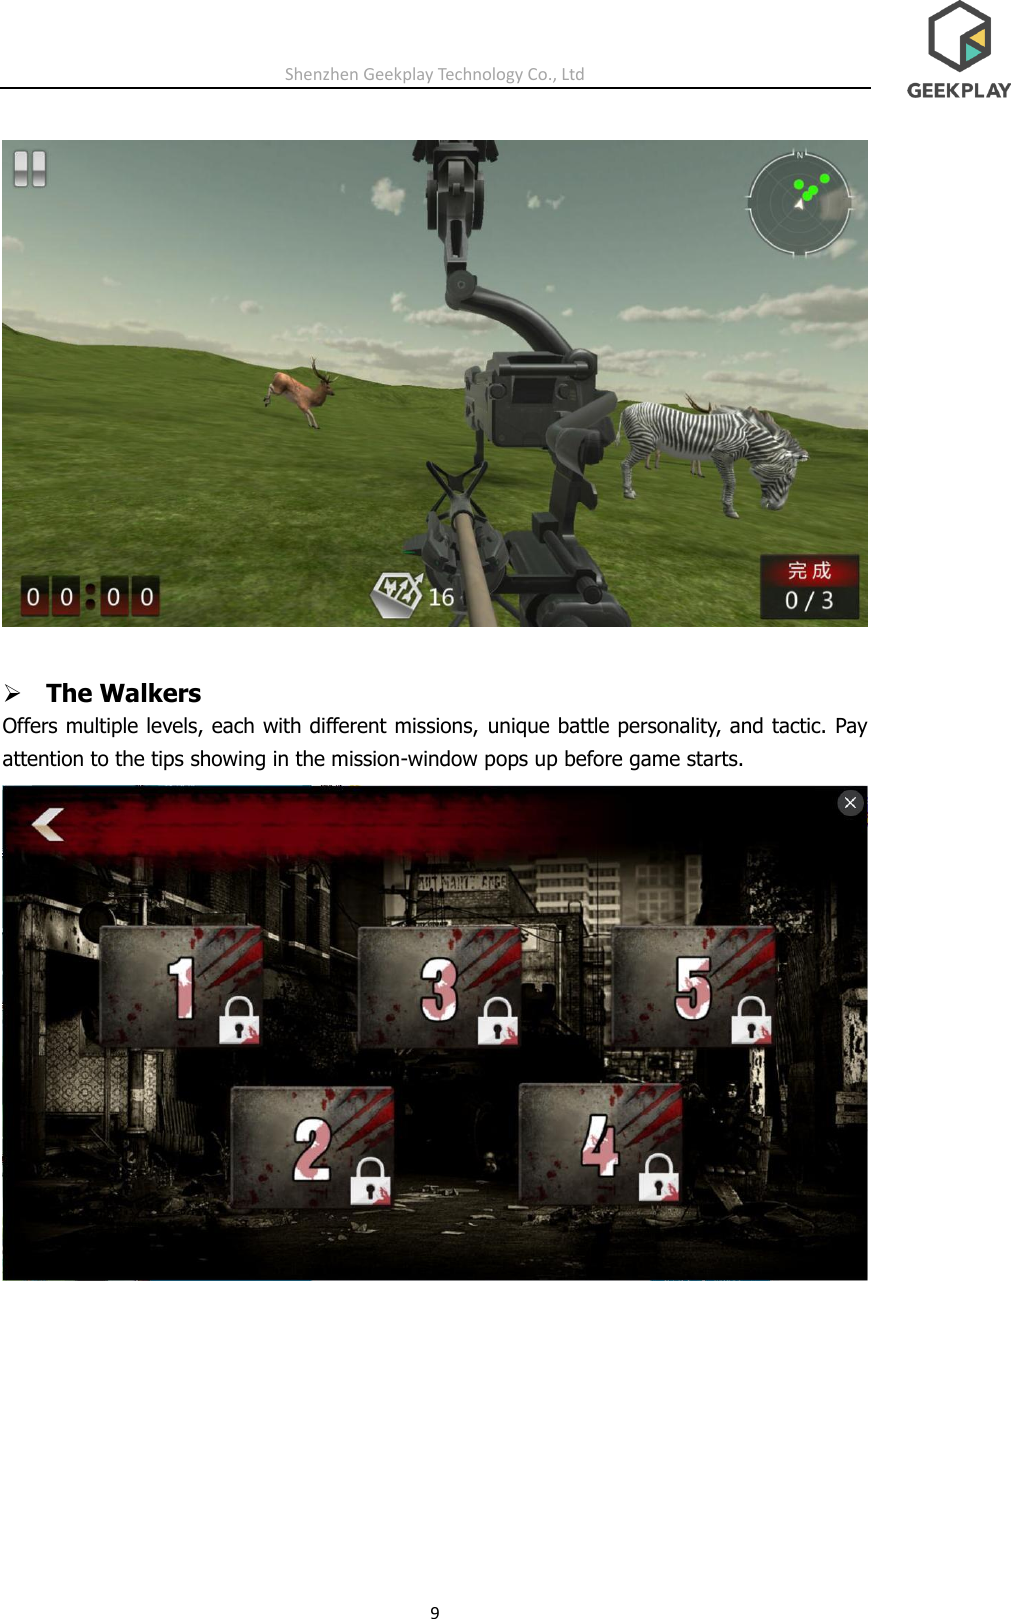 Shenzhen Geekplay Technology Co., Ltd 9   ➢ The Walkers Offers multiple levels, each with different missions, unique battle personality, and tactic. Pay attention to the tips showing in the mission-window pops up before game starts.  